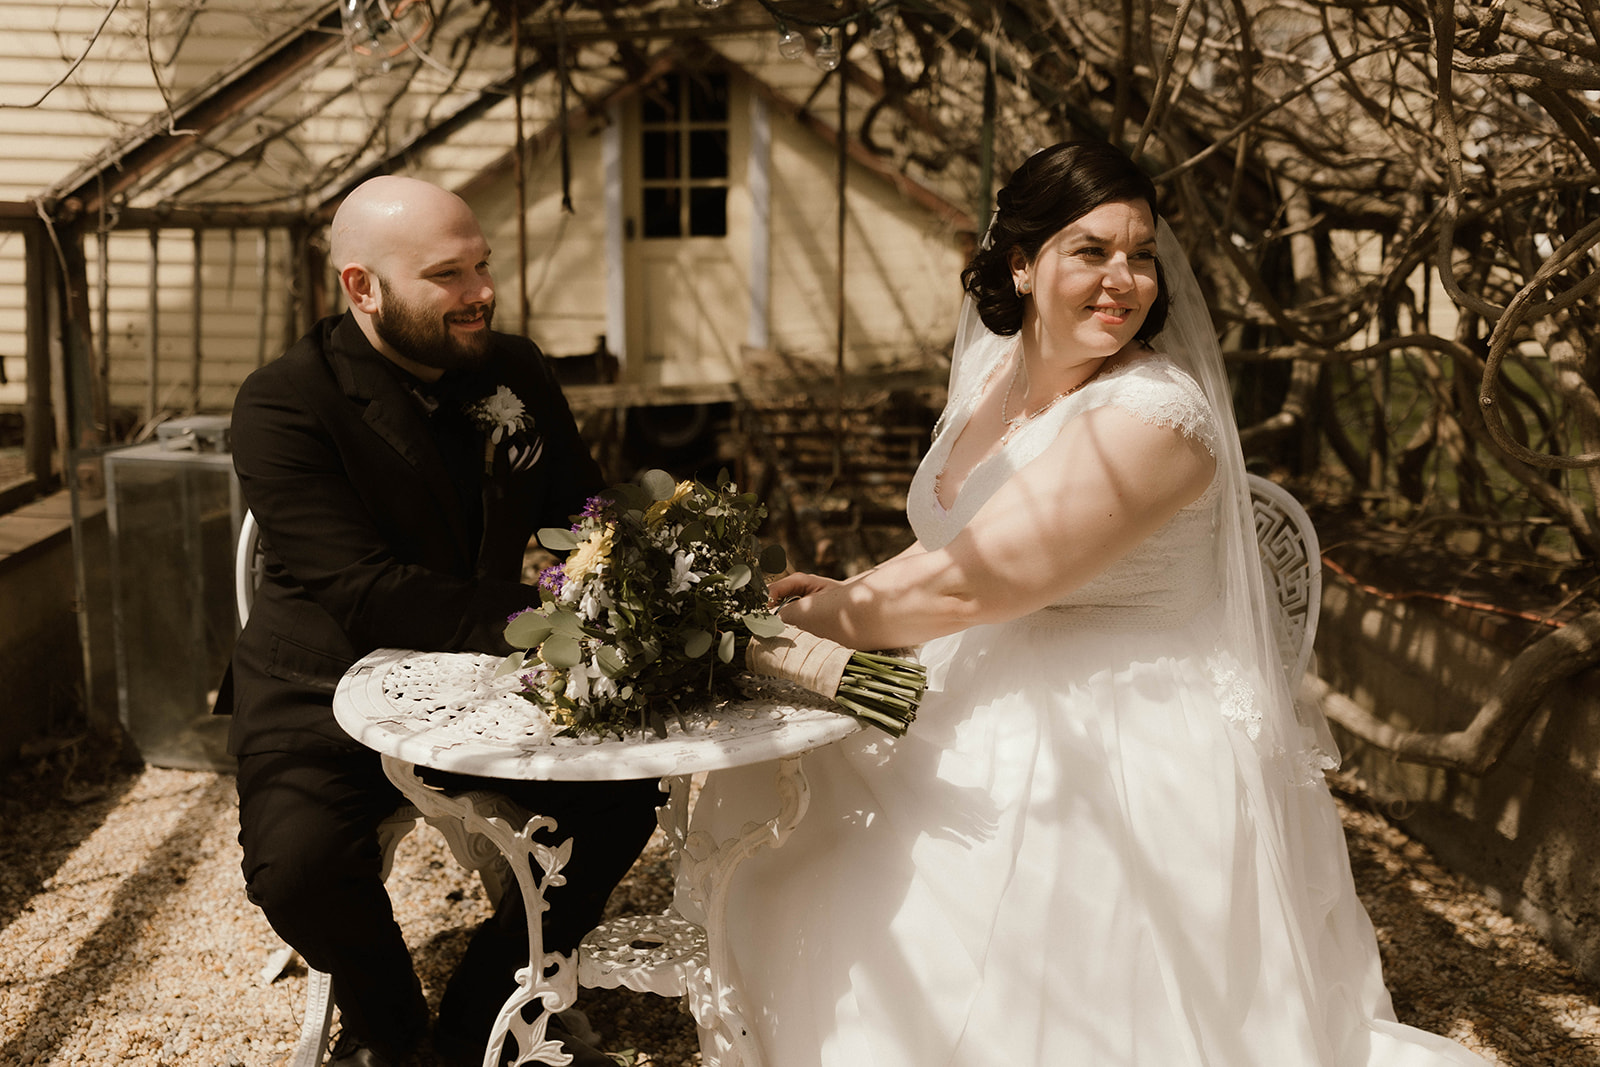 Beautiful bride and groom sit at small outdoor table and pose together